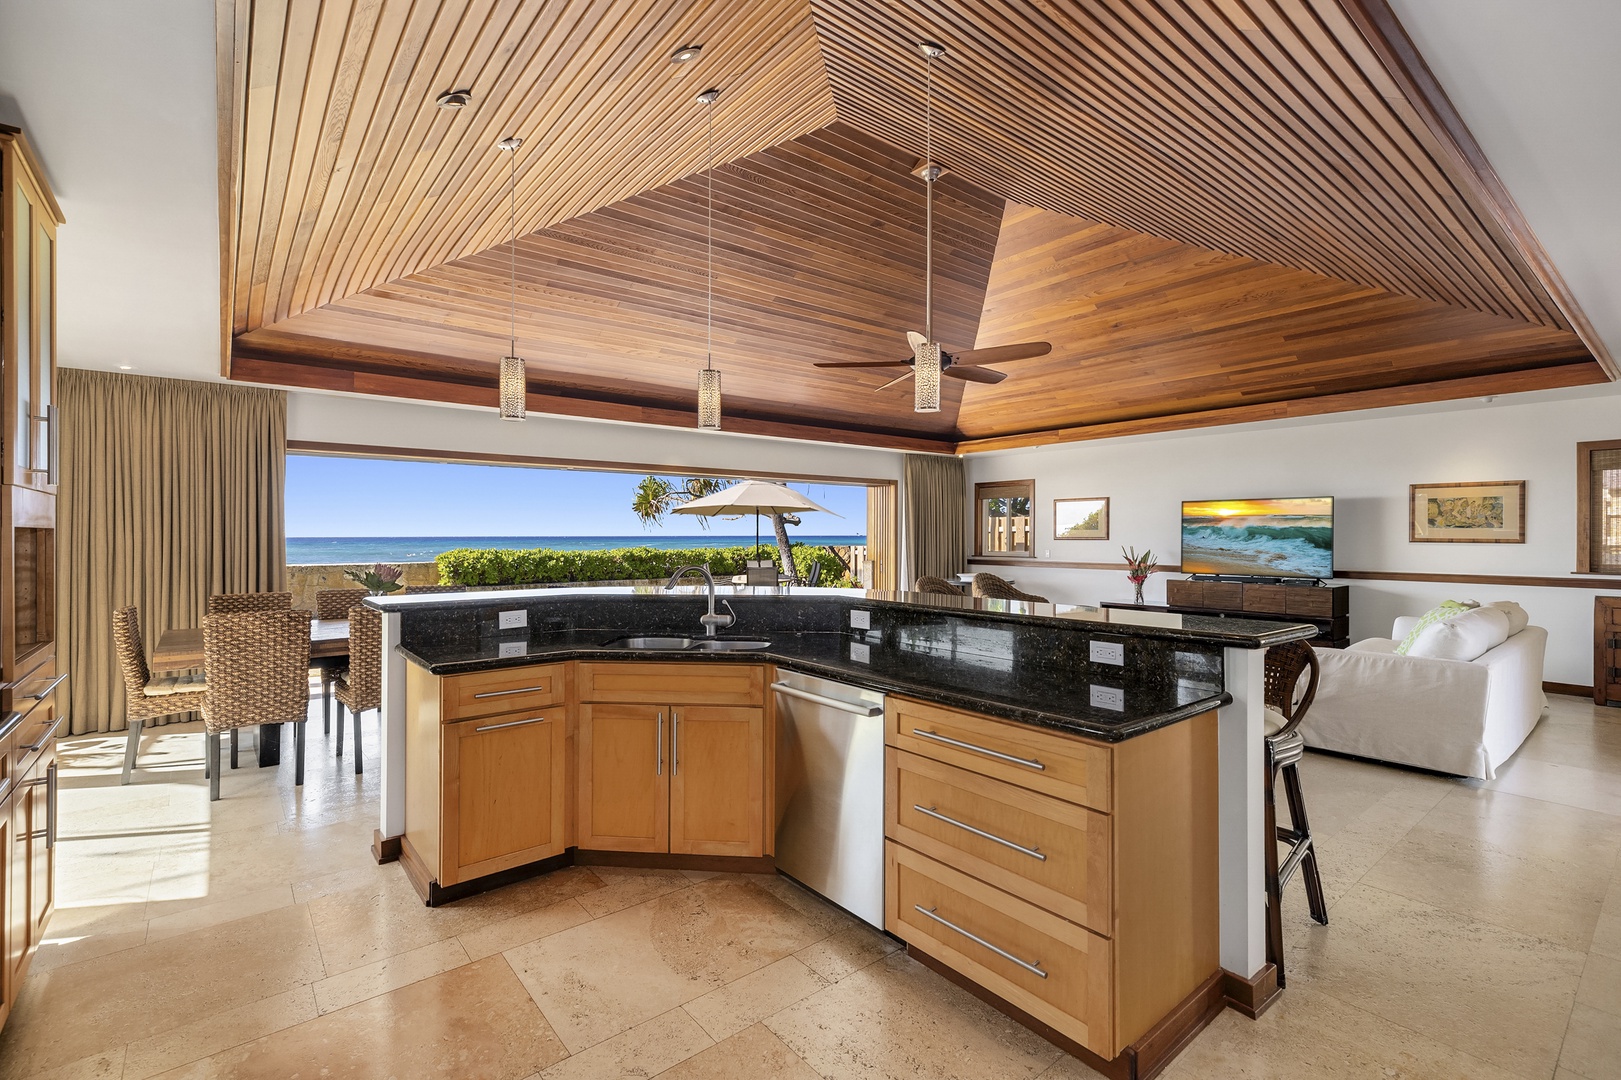 Honolulu Vacation Rentals, Hale Makai at Diamond Head - Open-concept kitchen with spectacular ocean views.